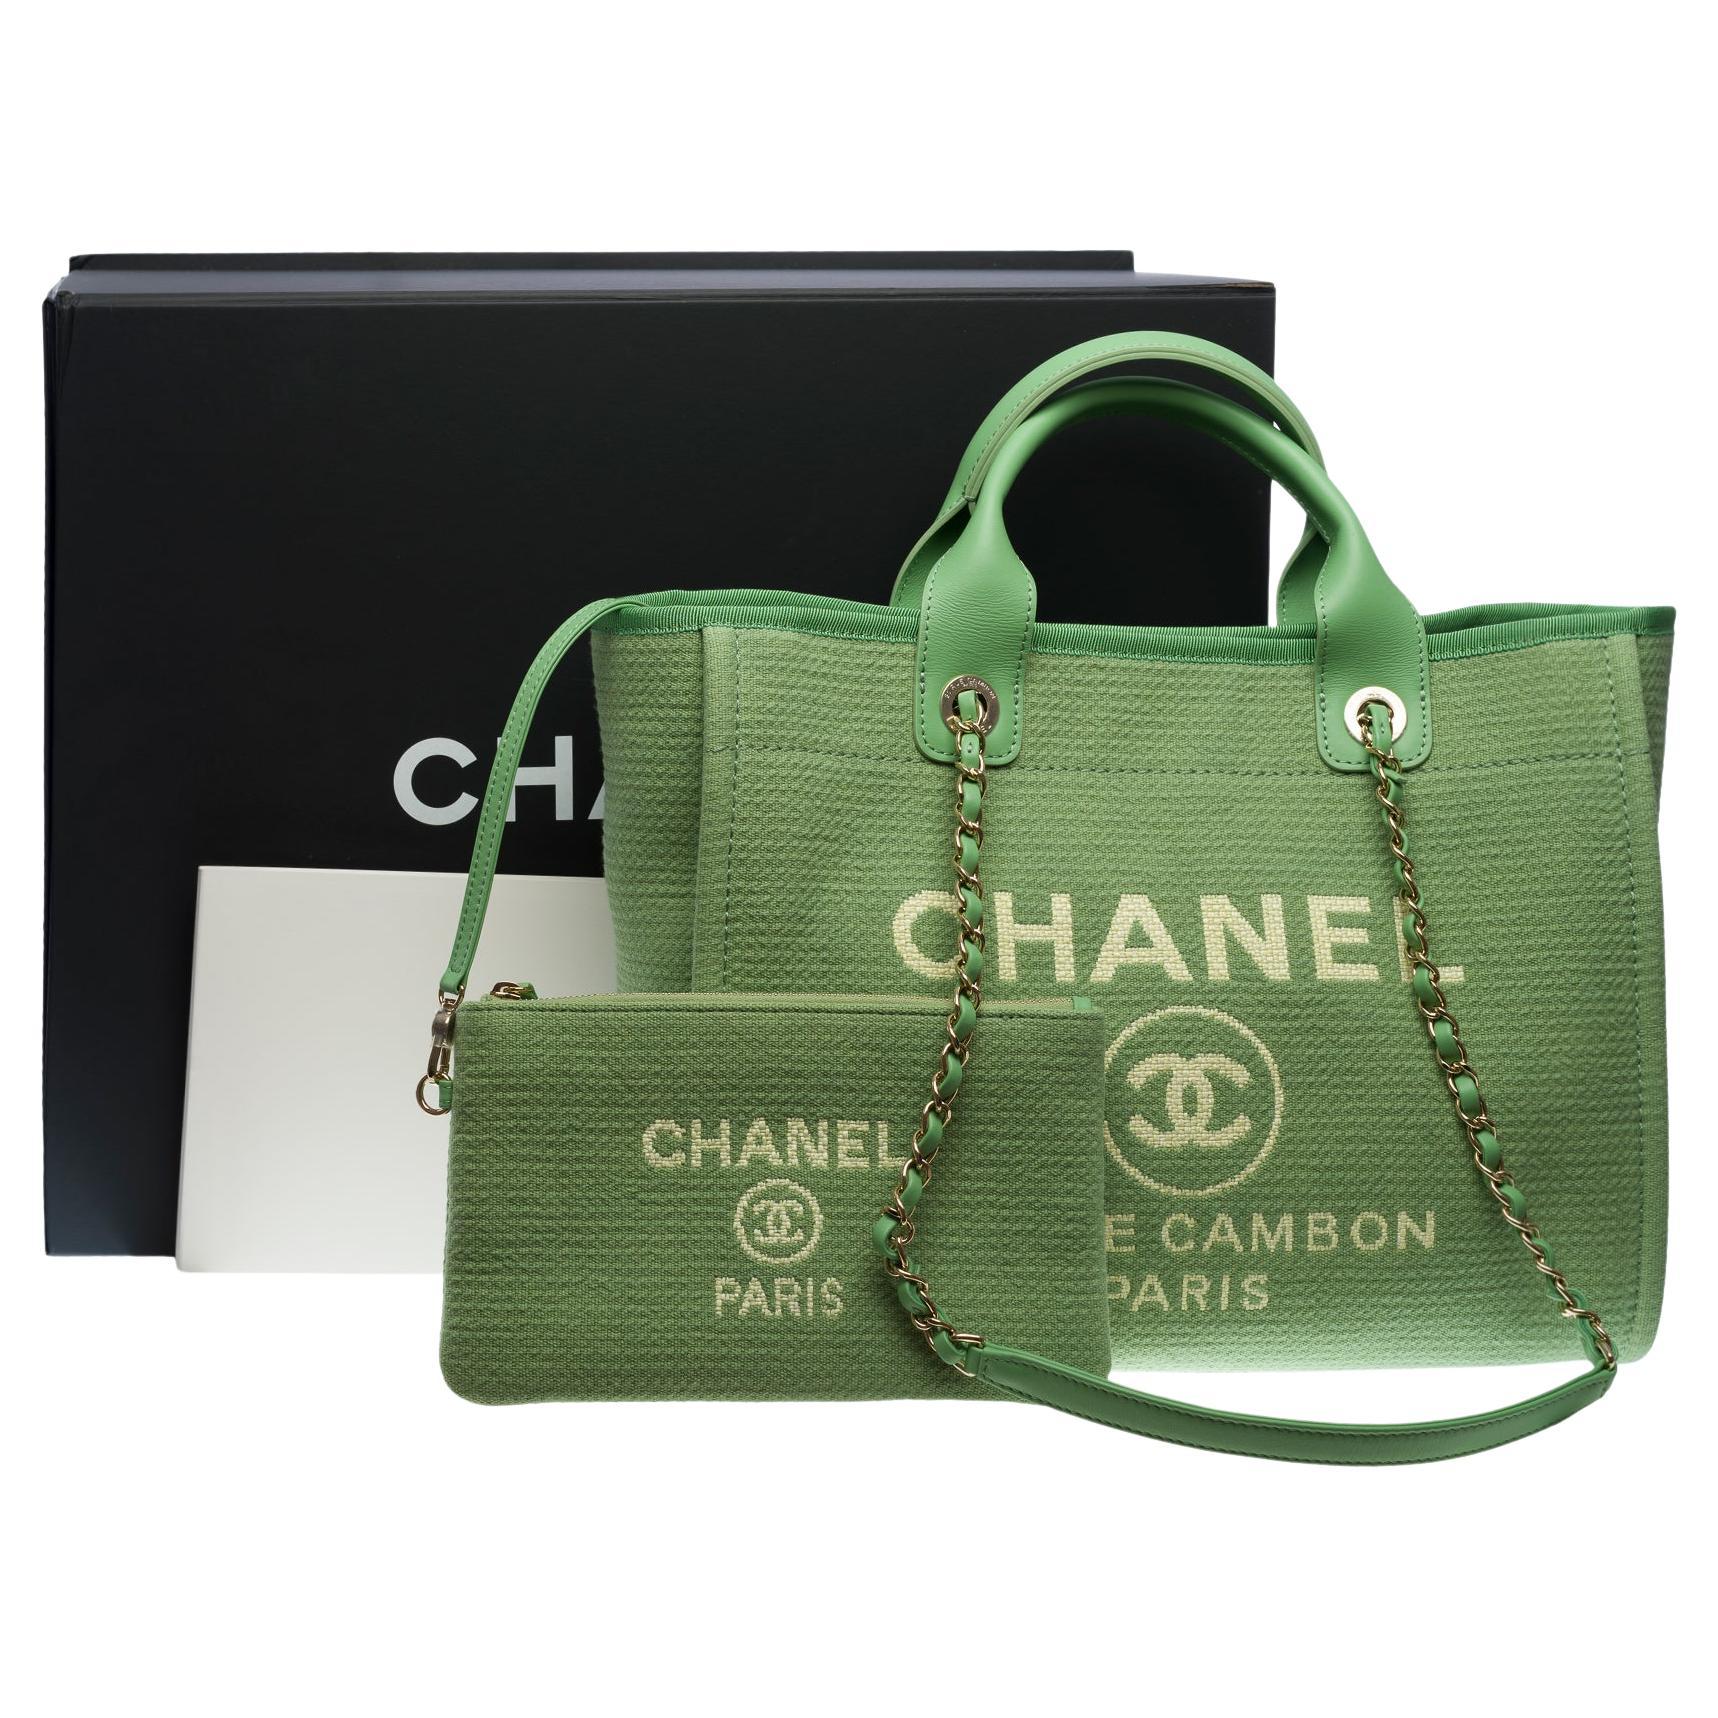 Chanel Classic Deauville Large Metallic Gold Navy Blue Denim Tote Bag 2019